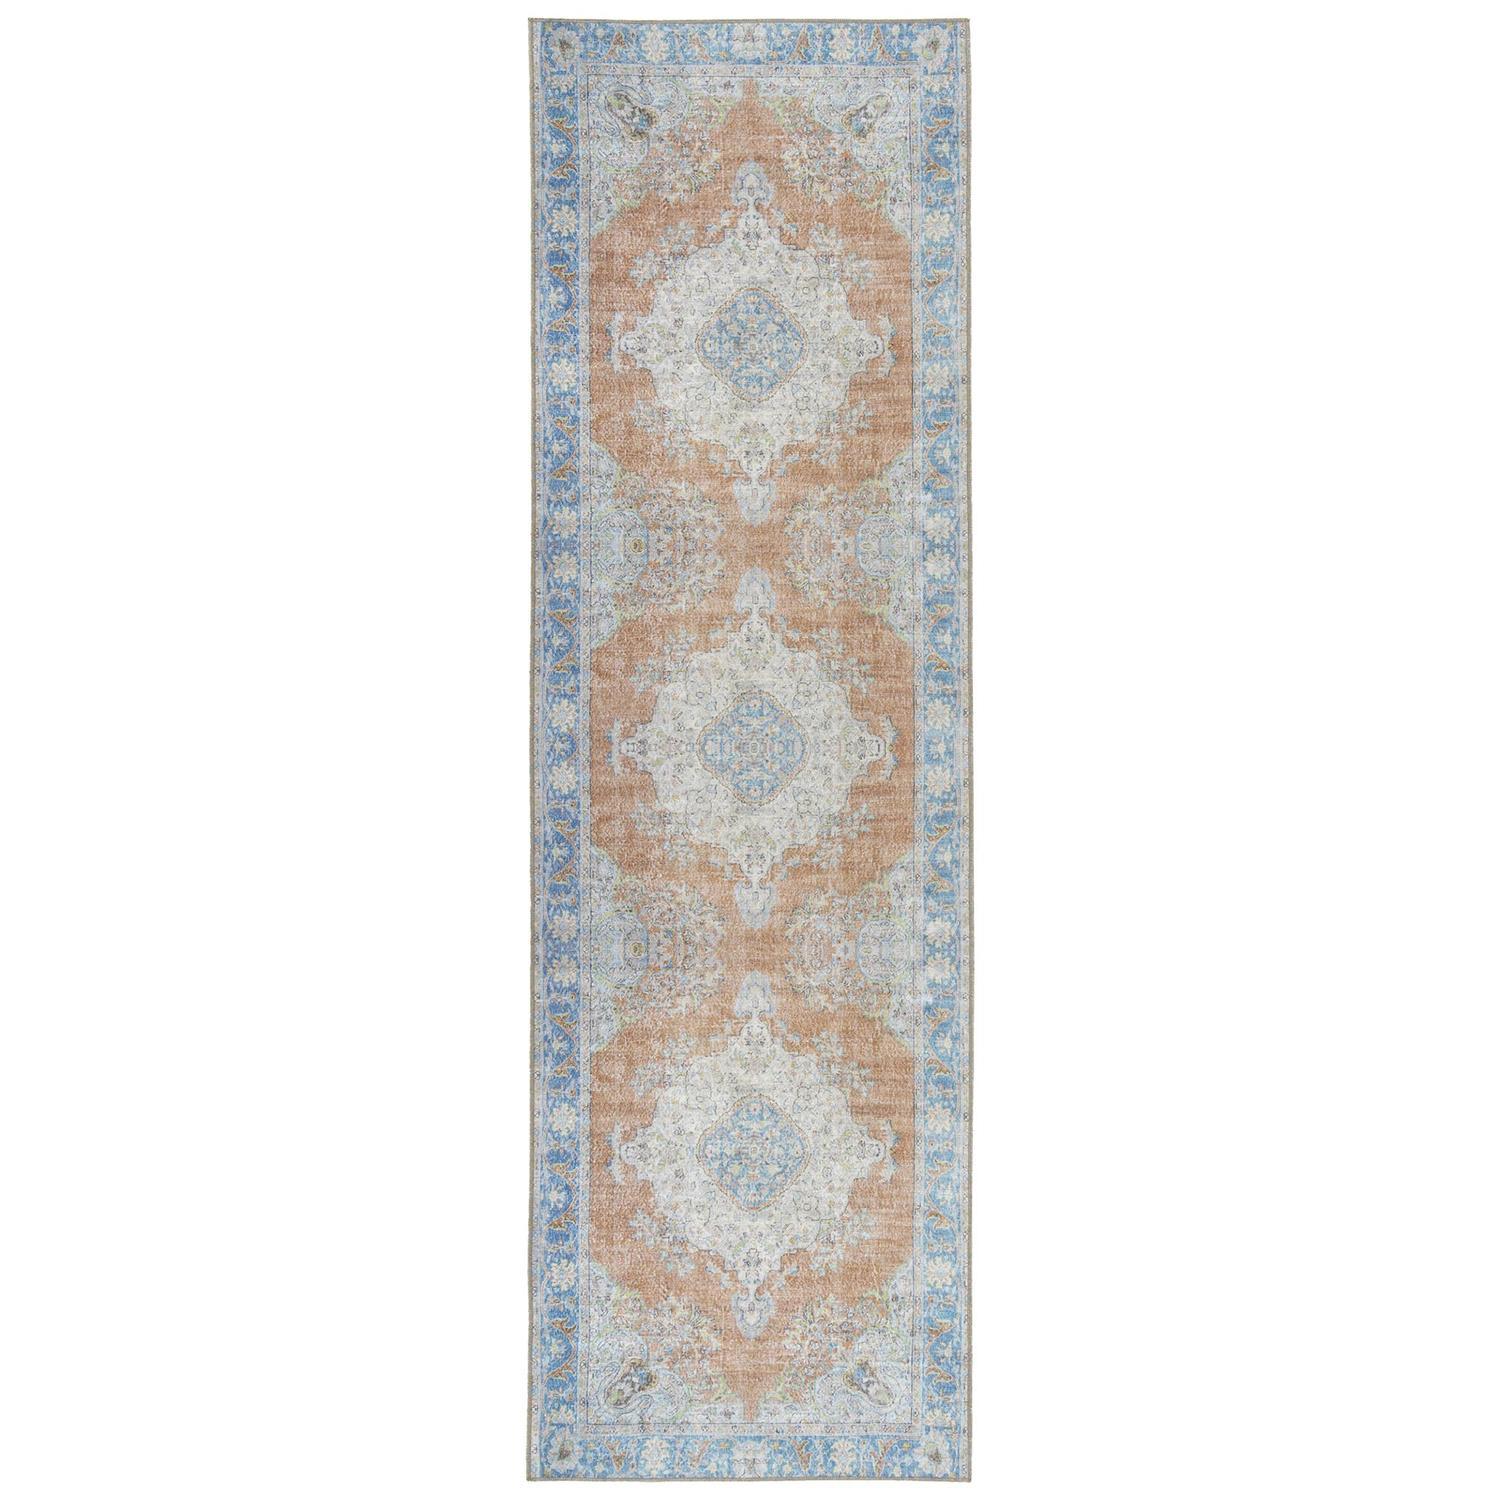 Kaleen Boho Patio BOH10-67 Rug in Copper - (2 Foot 3 Inch x 7 Foot 6 Inch) - image 5 of 5